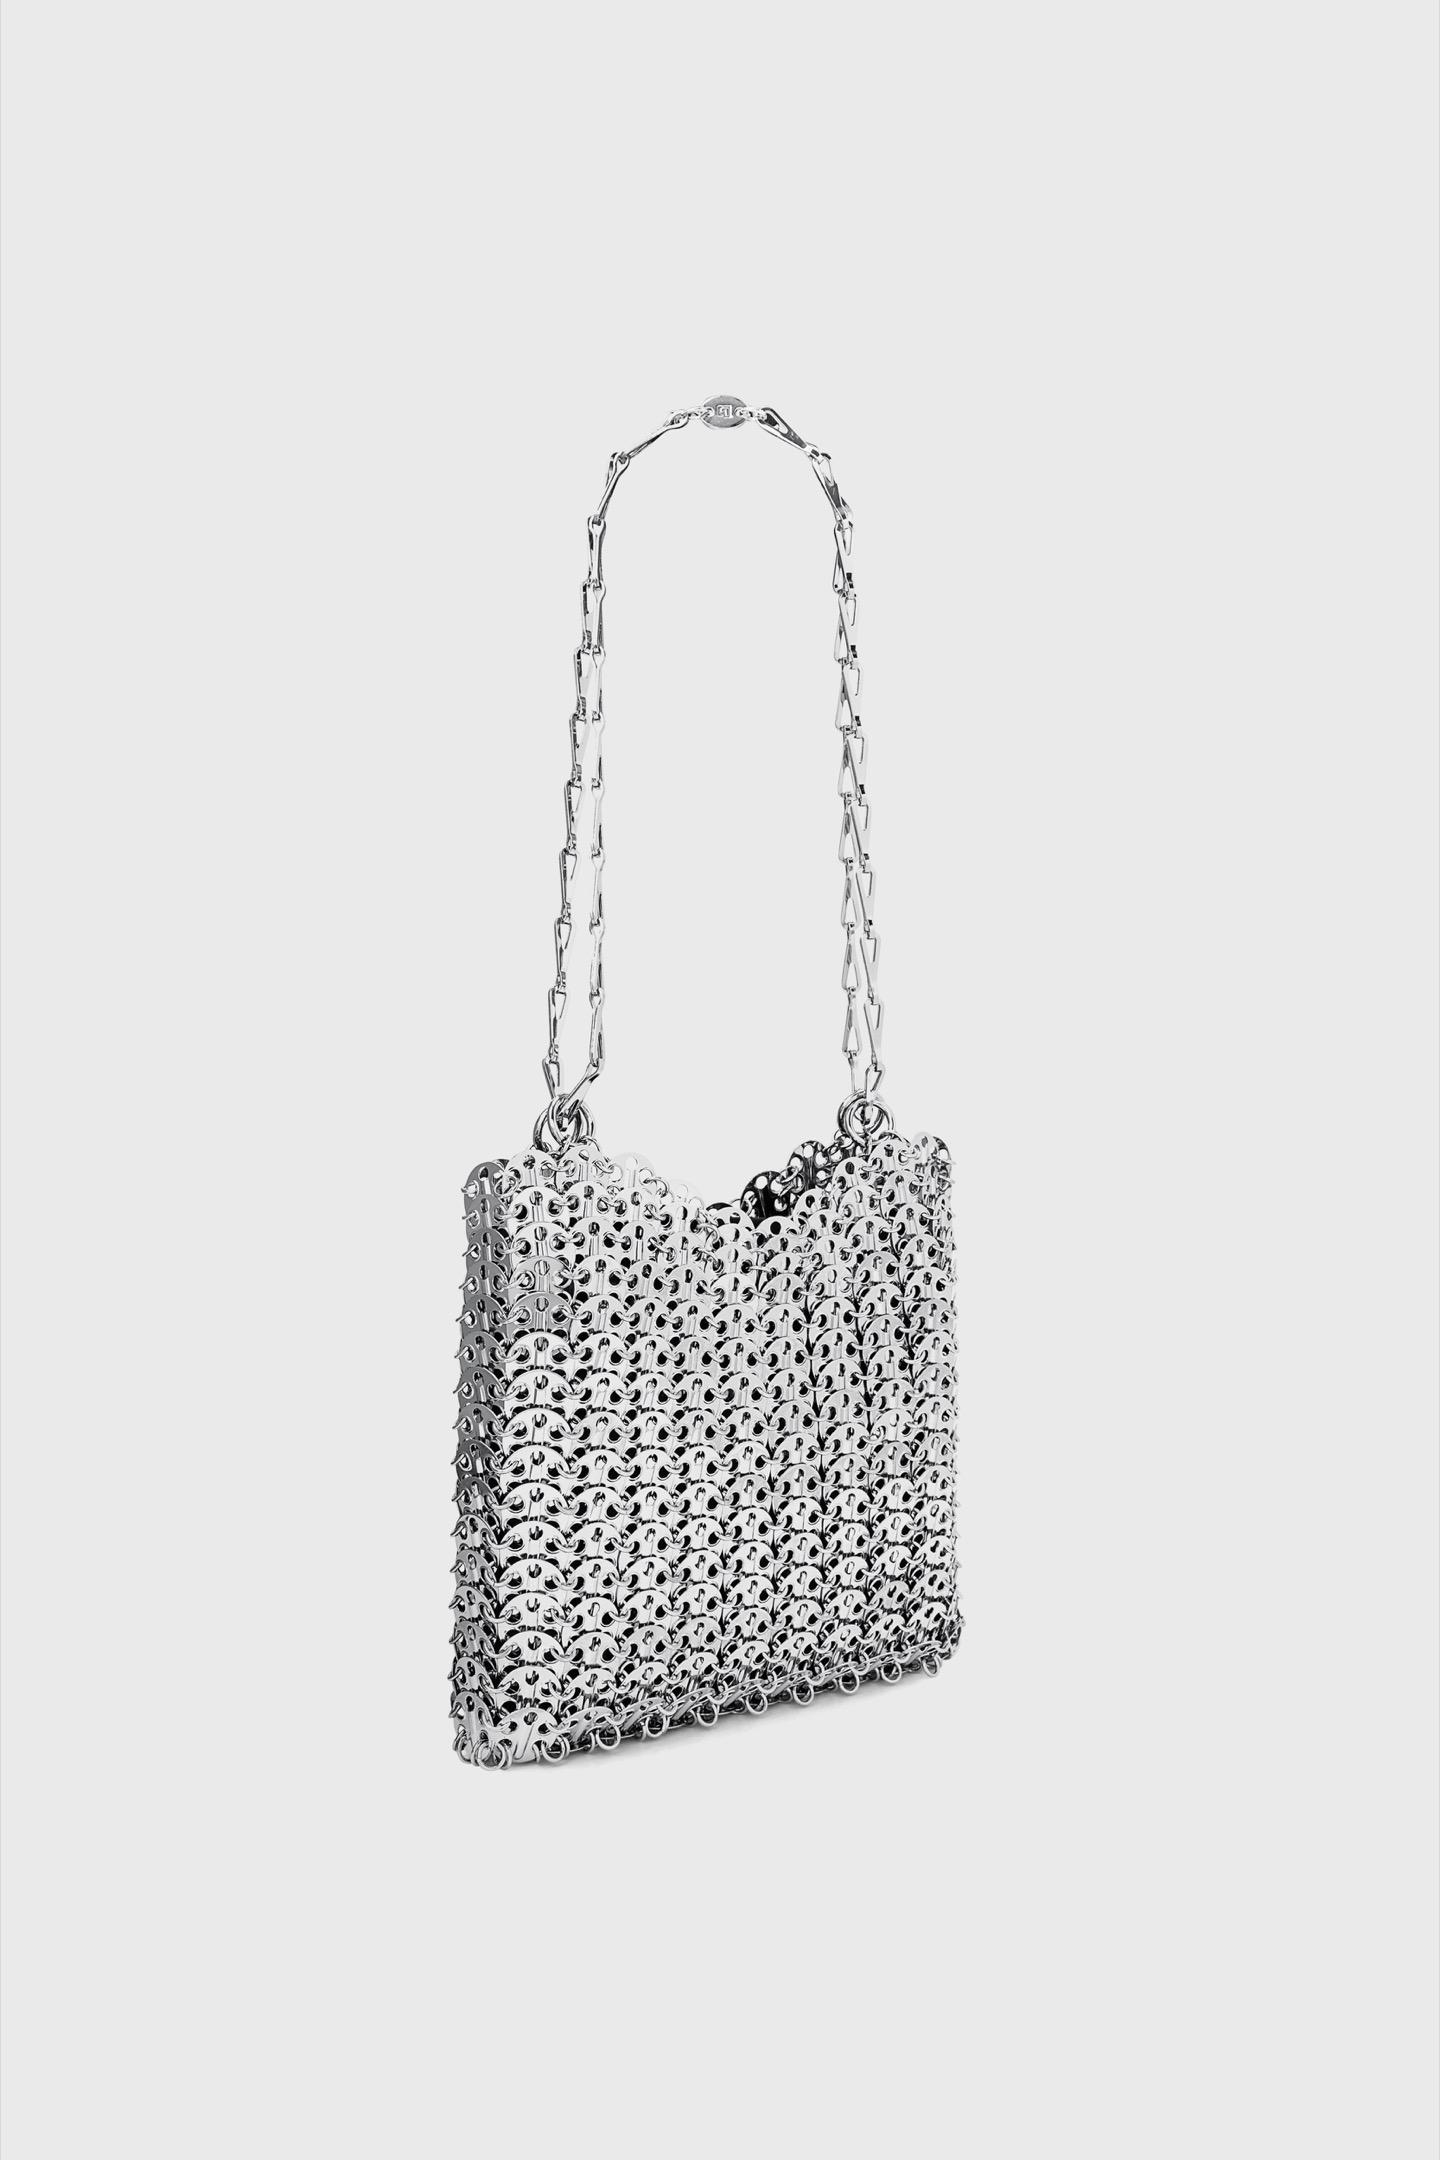 Paco Rabanne Iconic 1969 Bag Silver | Lyst UK